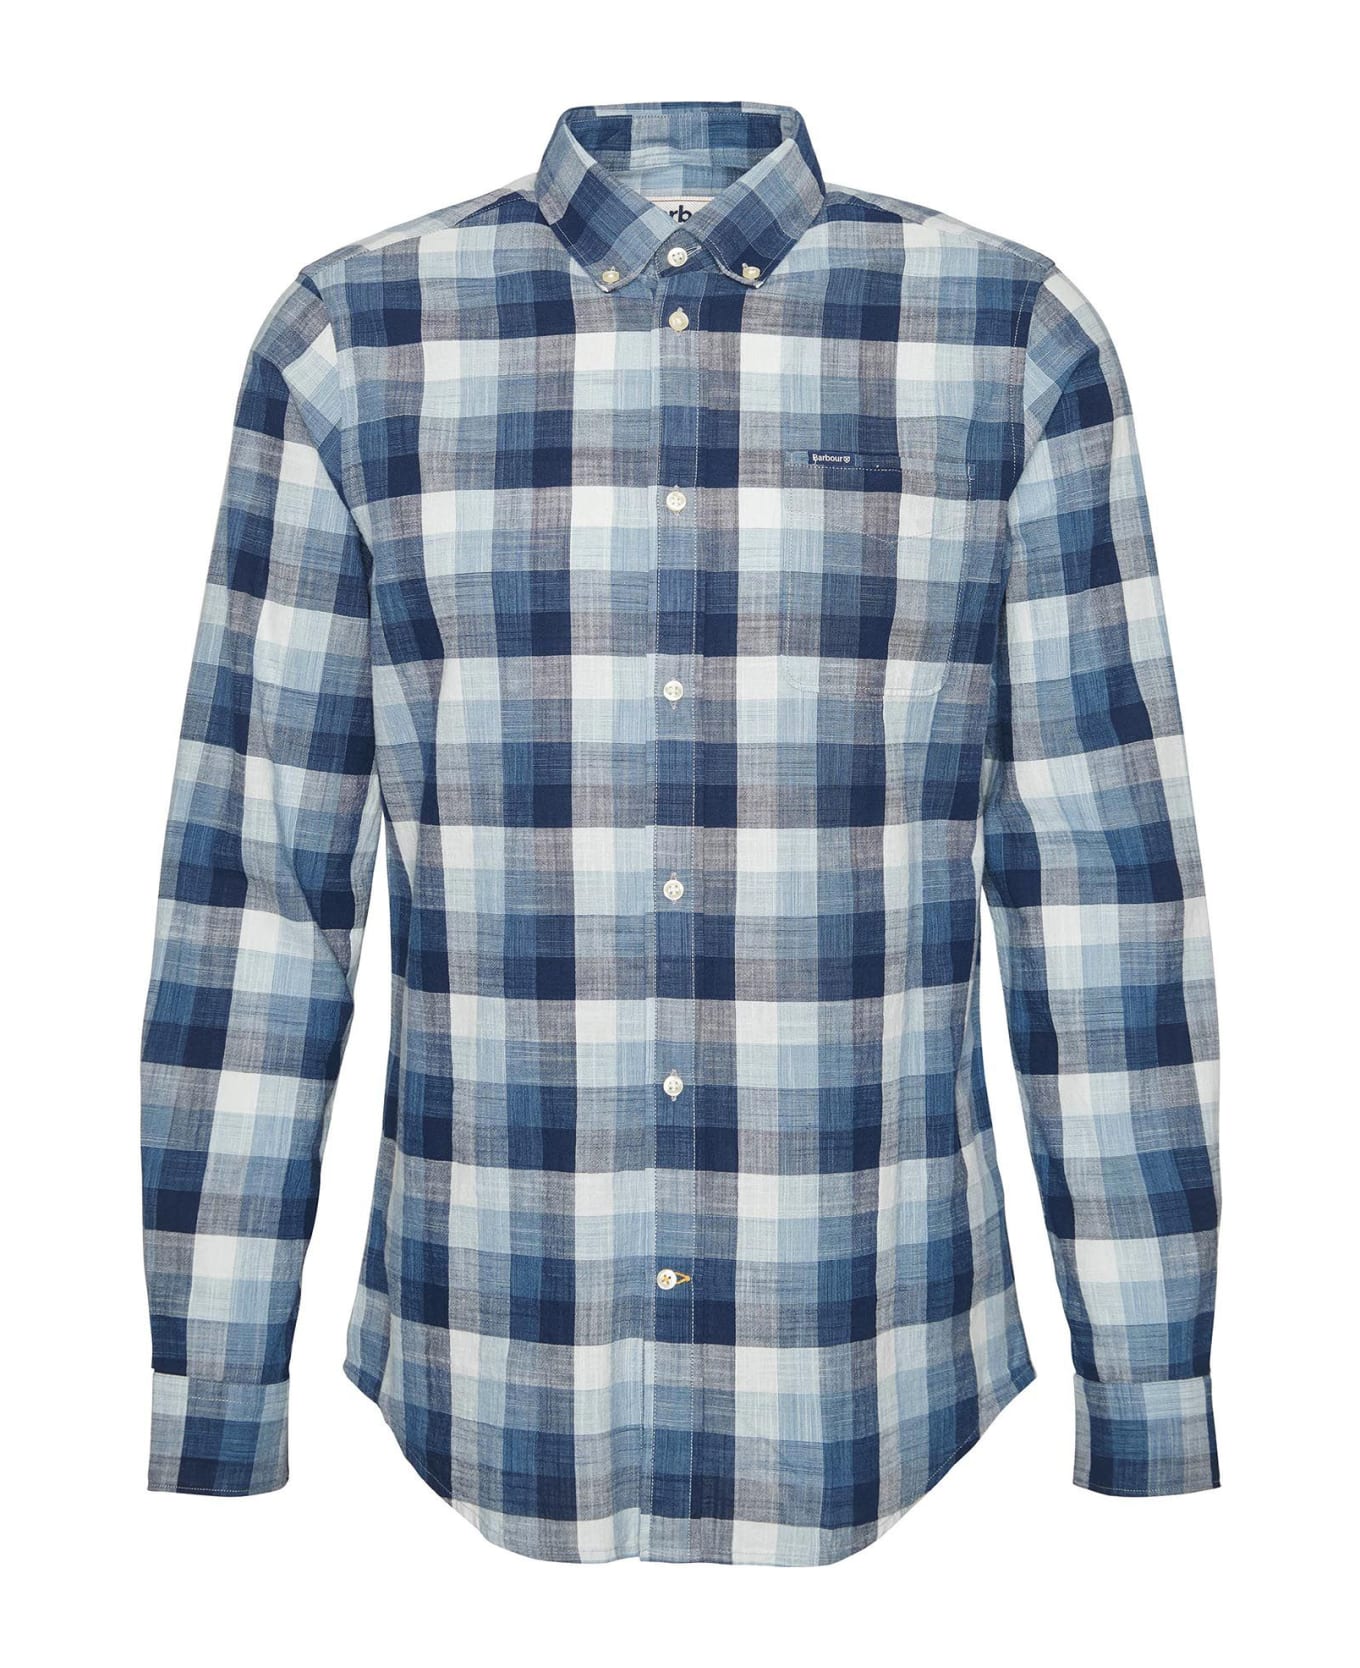 Barbour Long Sleeve Checked Shirt - NAVY